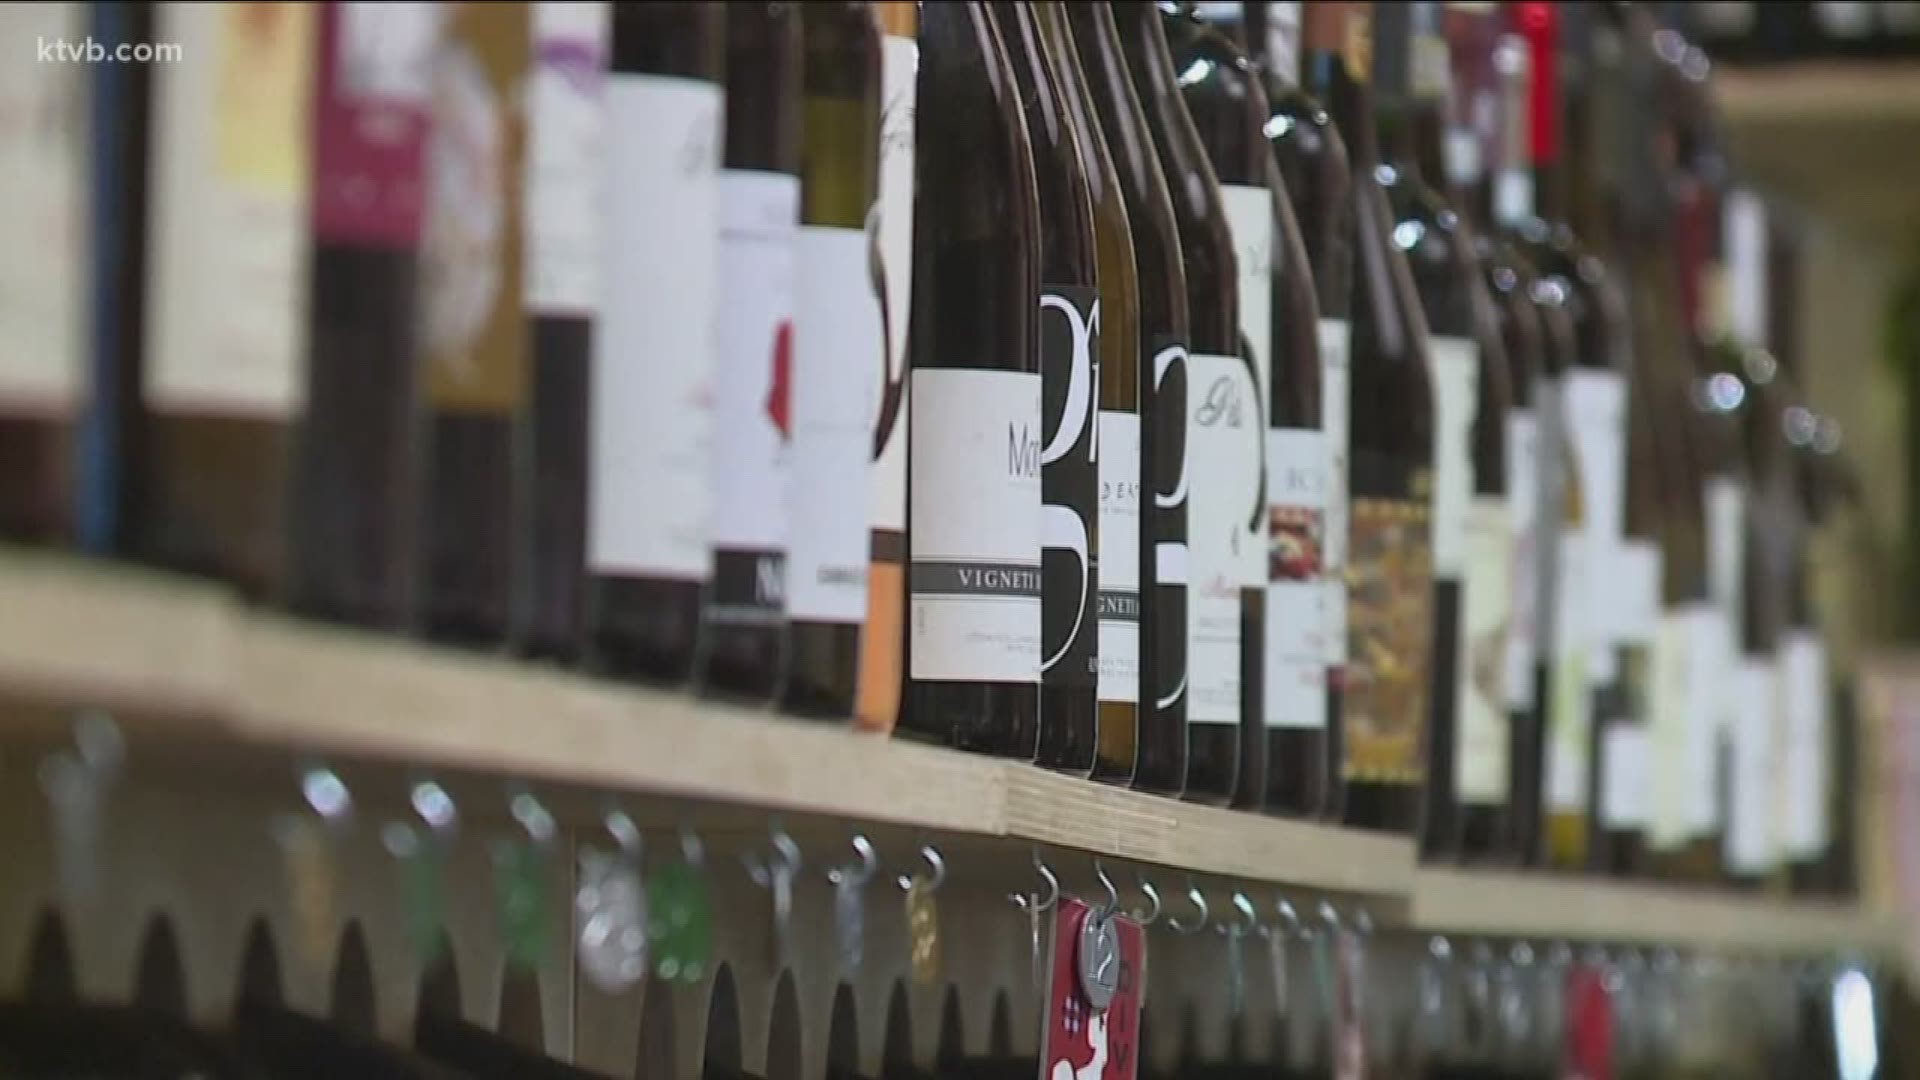 With changes to farmers markets, weddings and other outdoor spring and summer events, wineries are relying on individual sales and wine club memberships to get by.